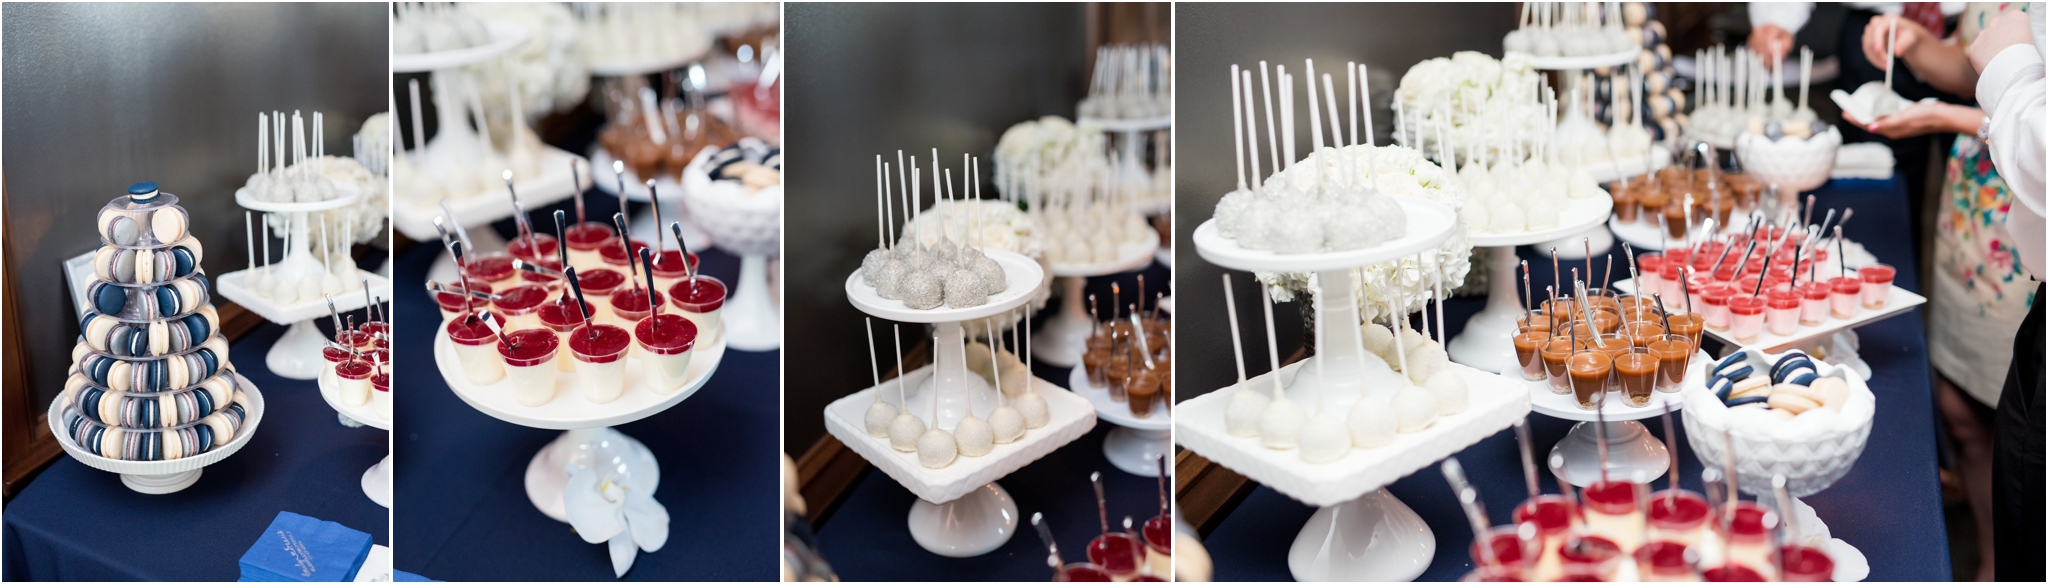 Regions Tower | Sarah and Rachel Wedding Photographers | Indianapolis, IN | Cake Pops and Macaroons